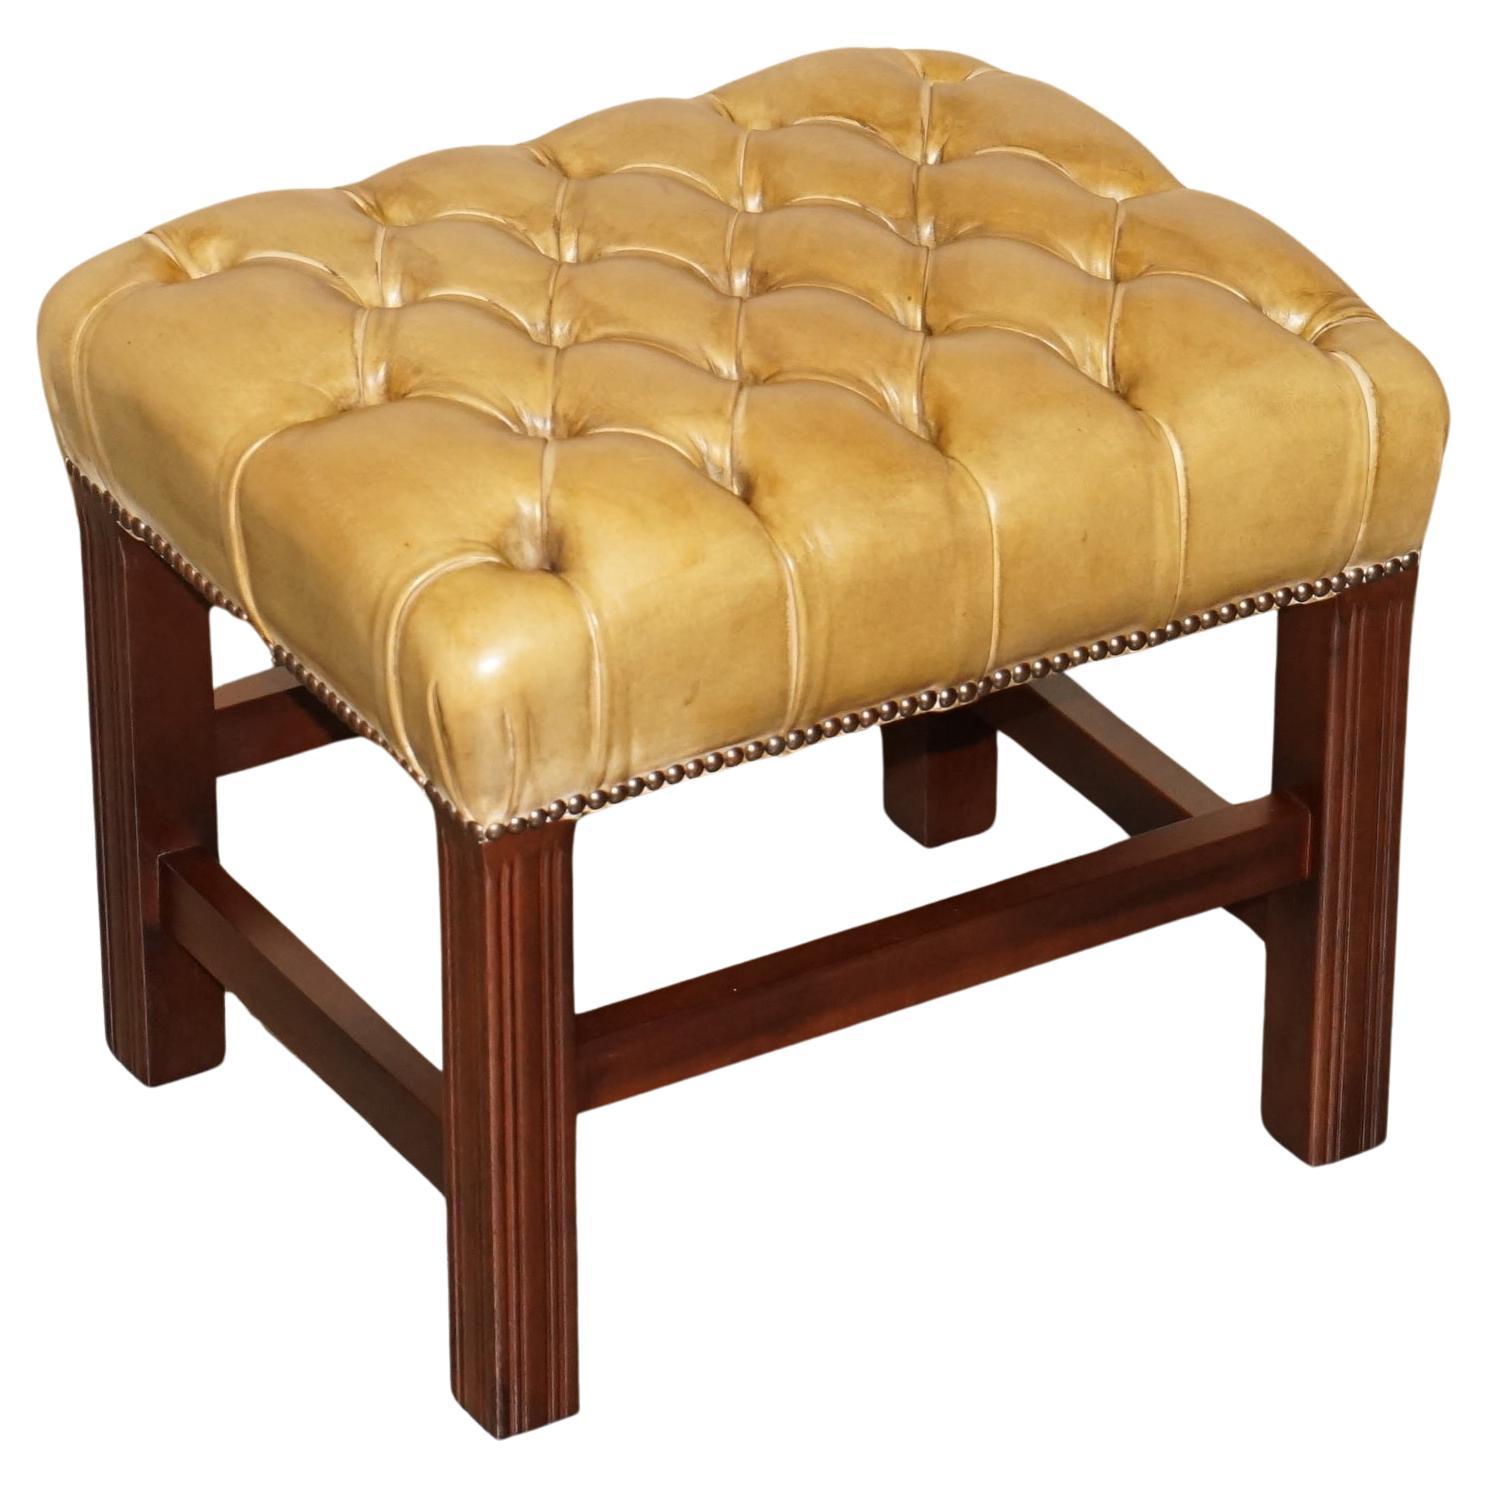 VINTAGE Tan BROWN LEATHER CHESTERFIELD TUFTED BARON FOOTSTOOL PART OF SUiTE im Angebot